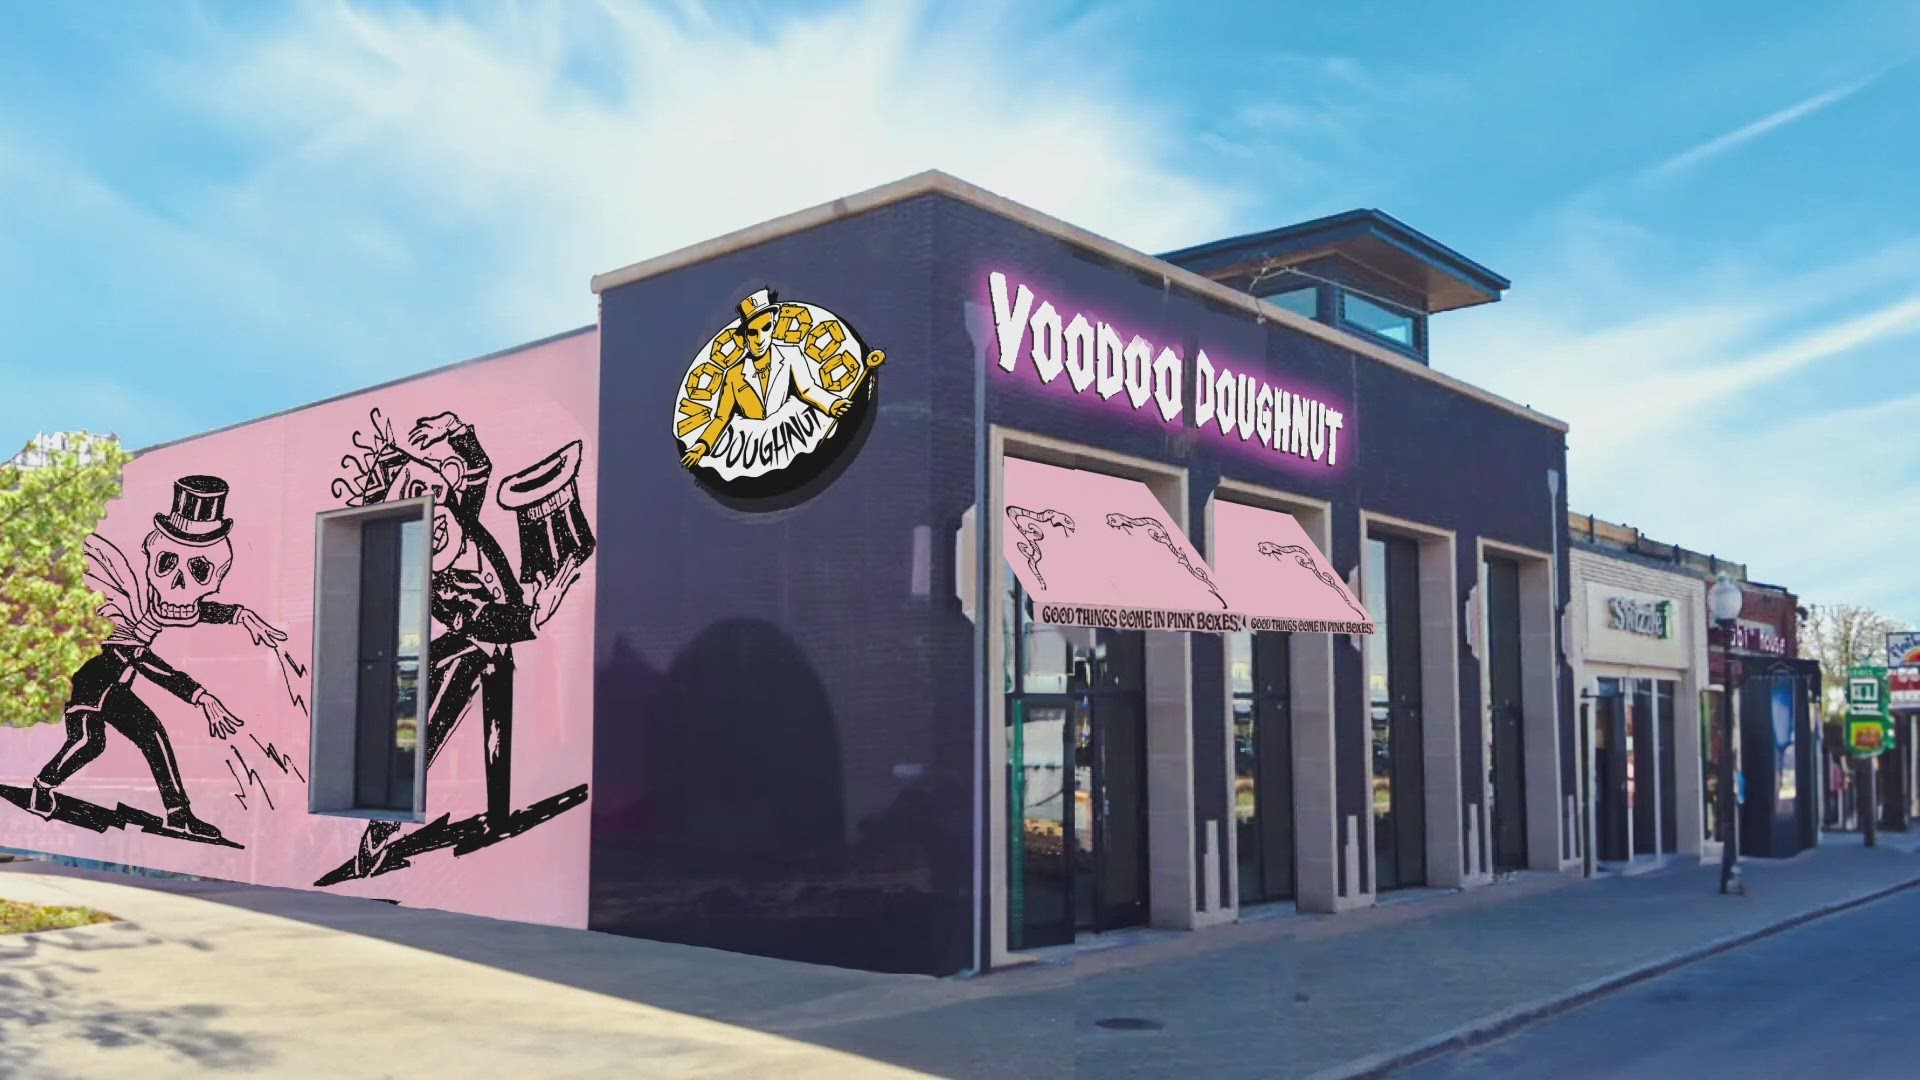 "We’re thrilled to unveil our plans to establish a presence in Dallas — a city we've had our eye on for quite some time,” Voodoo Doughnut CEO Chris Schultz said.